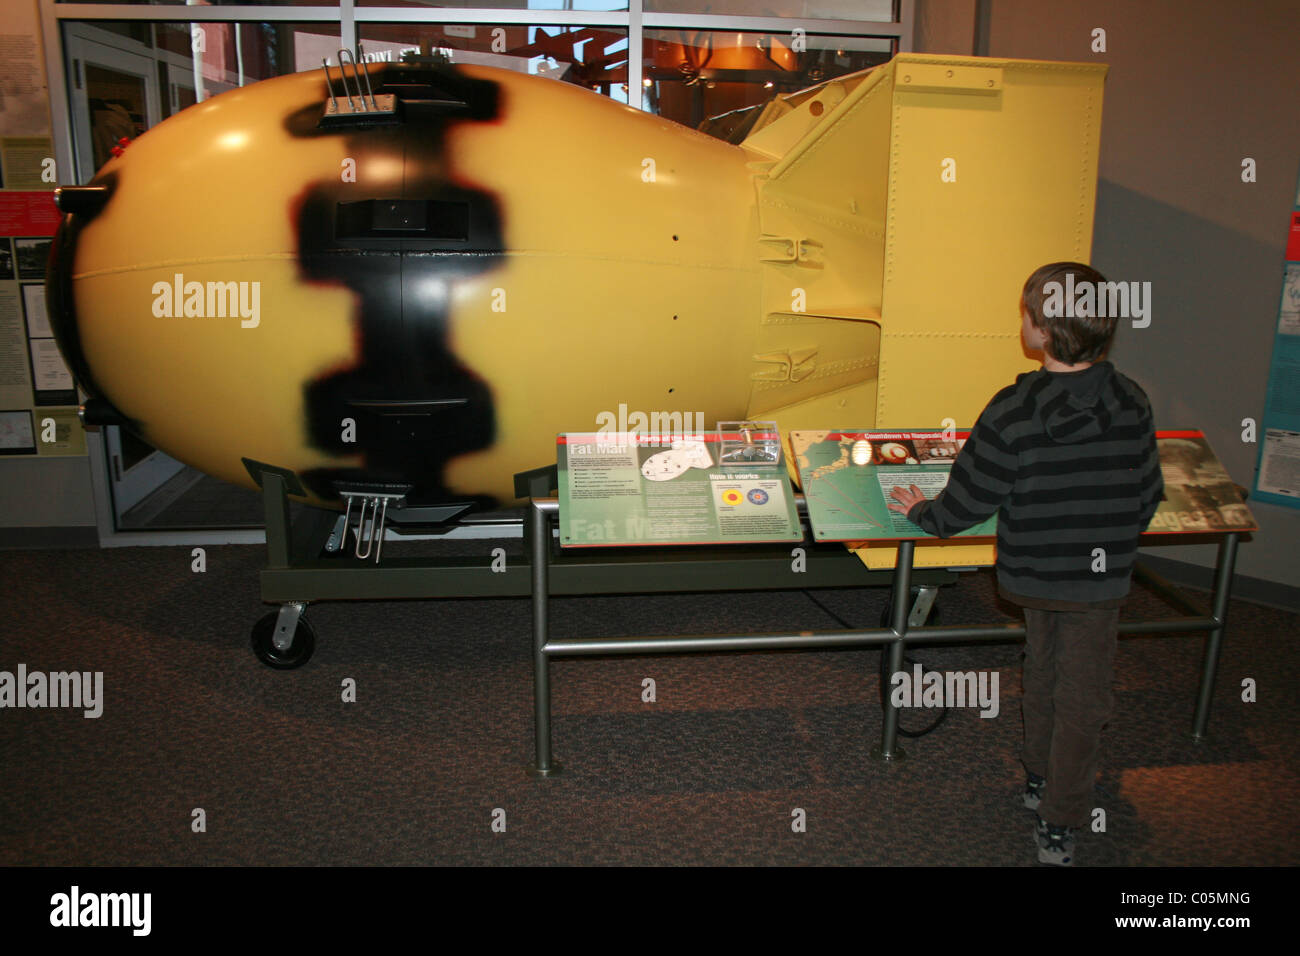 A model of the Fat Man atomic bomb dropped on Nagasaki, Japan in 1945.  Child is looking at the bomb and reading about history Stock Photo - Alamy